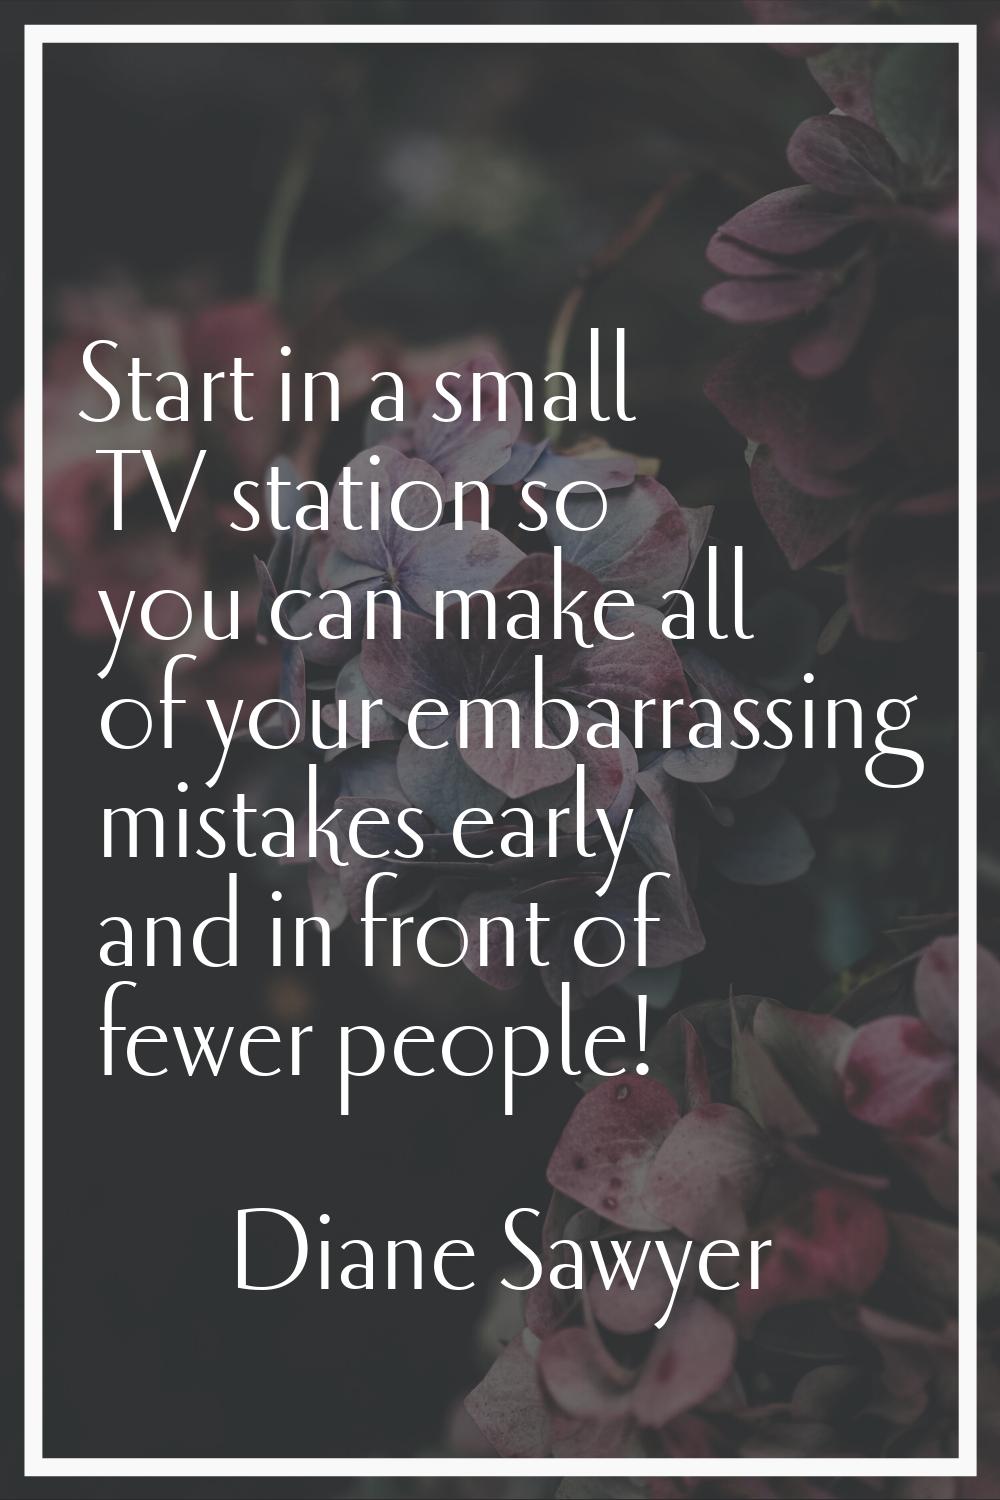 Start in a small TV station so you can make all of your embarrassing mistakes early and in front of